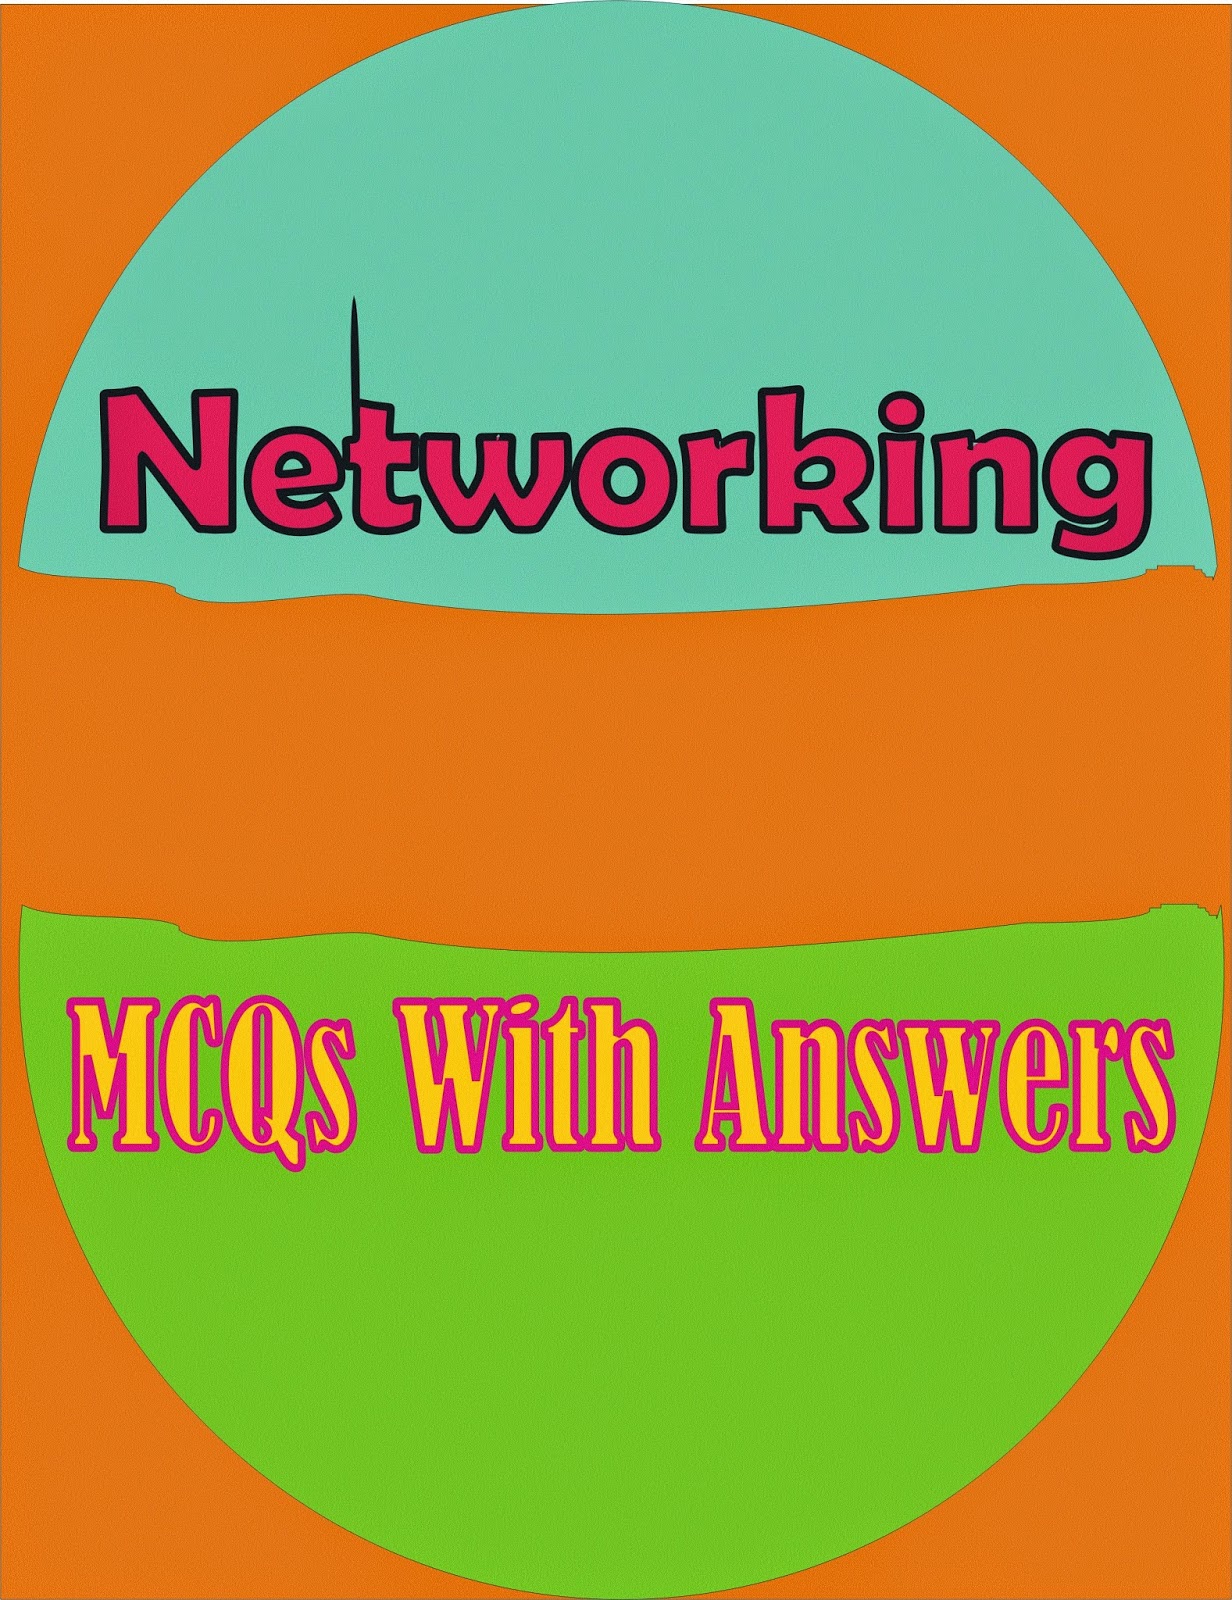 Computer Networking MCQs with Amswers | Free Books Store